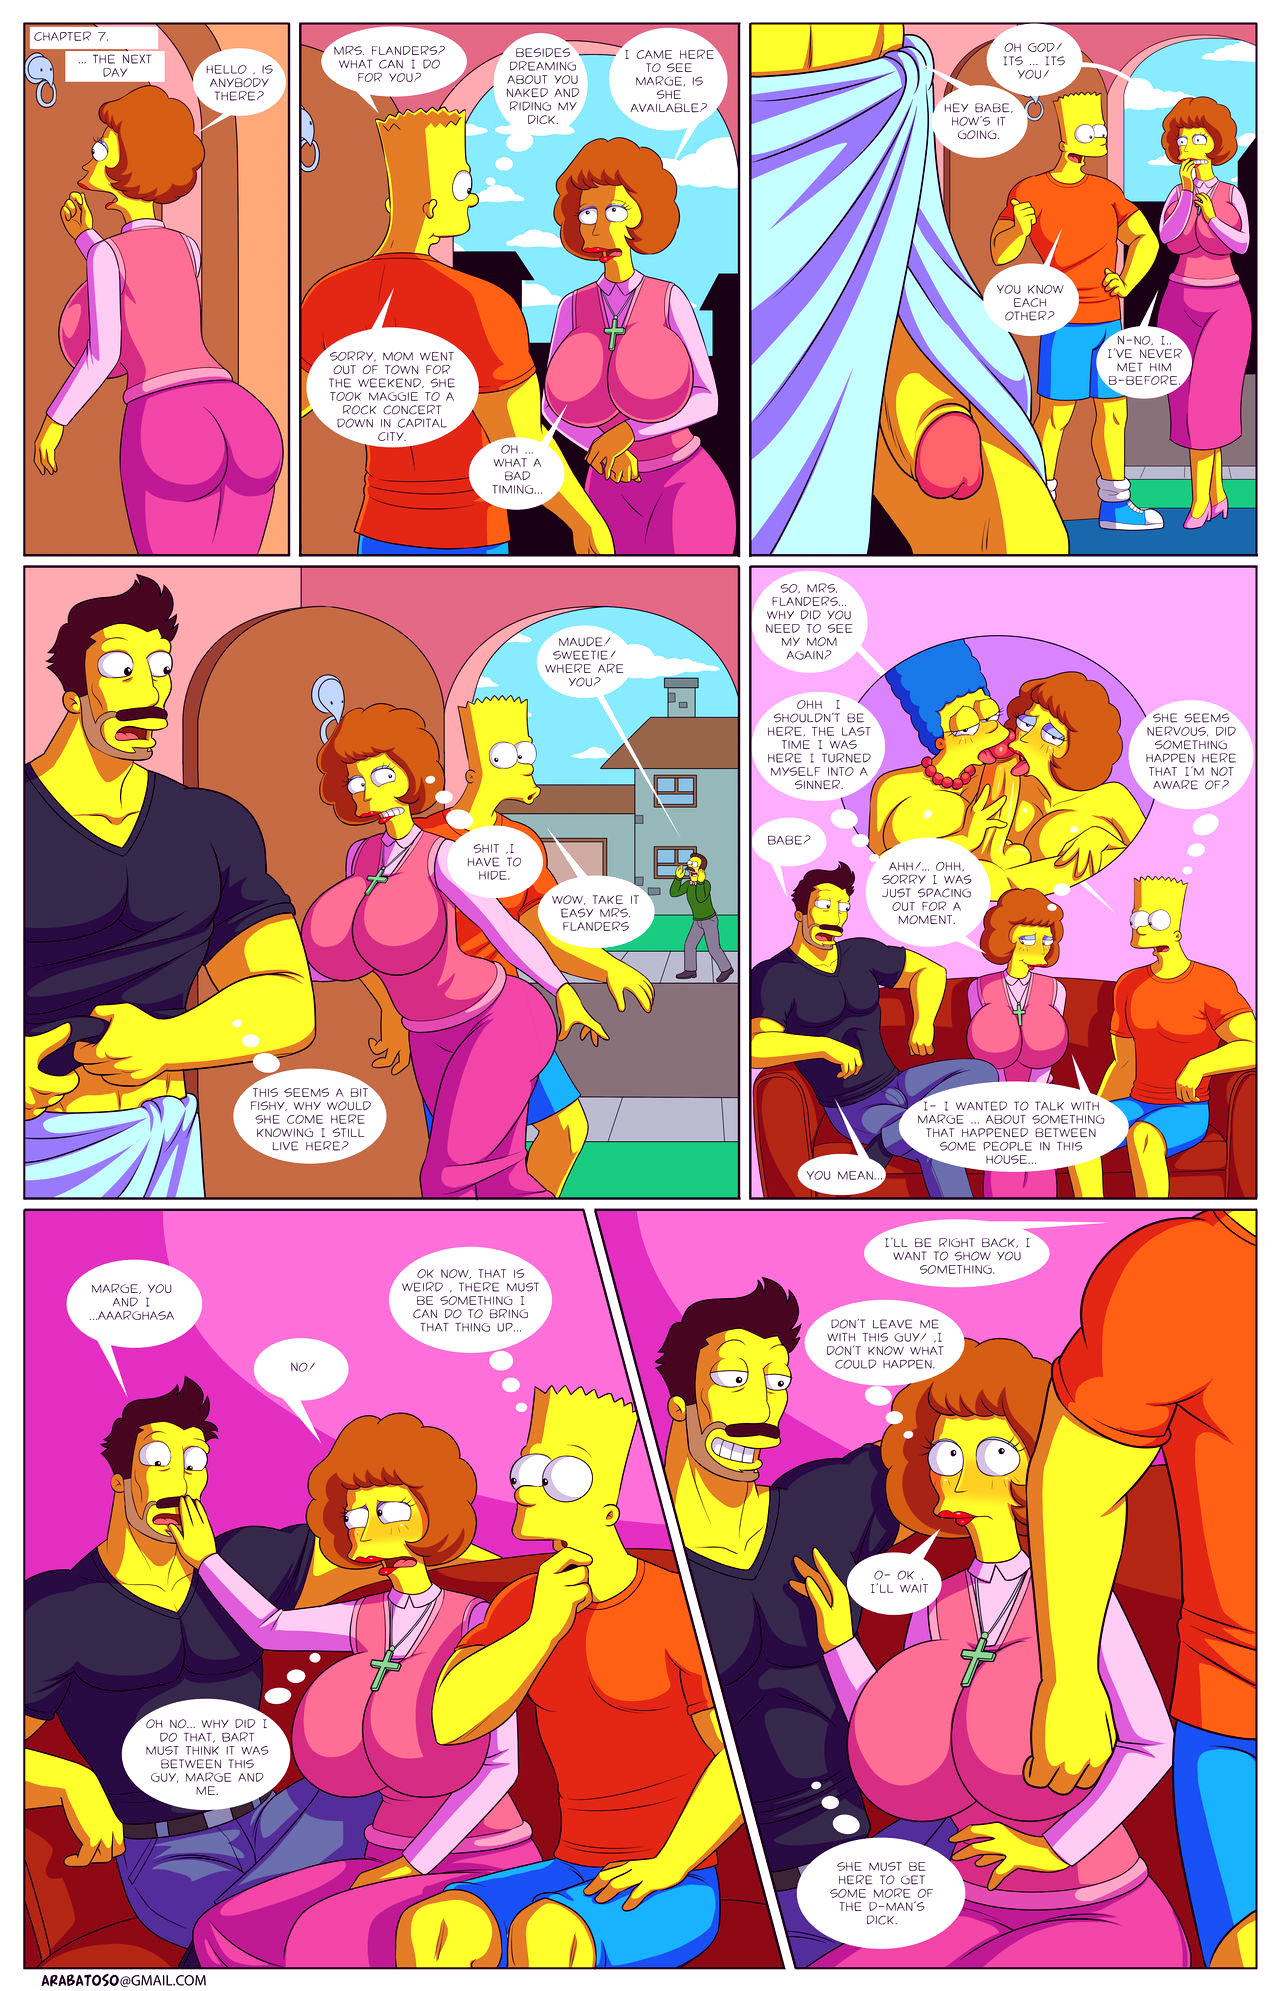 Darrens adventure or welcome to springfield porn comic picture 34